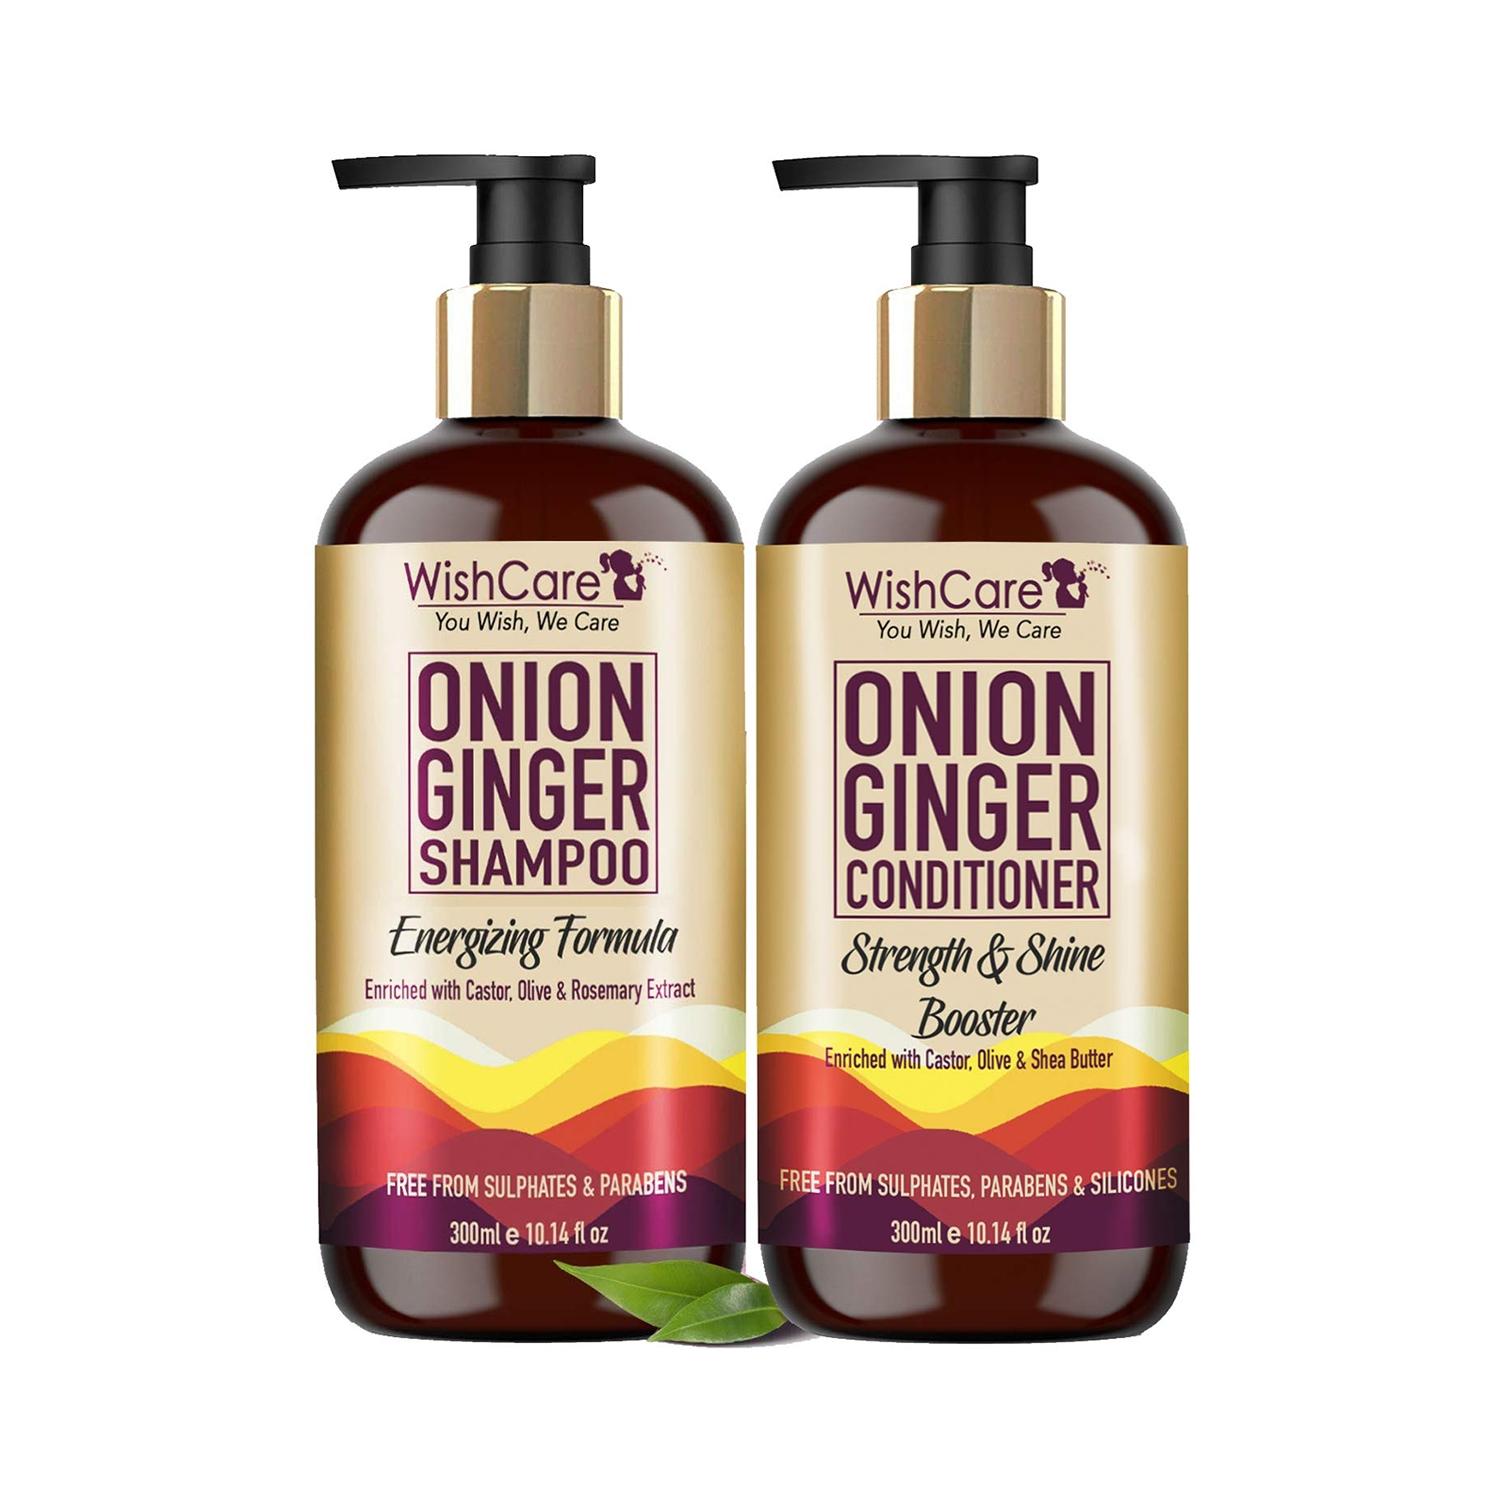 WishCare Red Onion Ginger Shampoo & Conditioner Kit (Shampoo and Conditioner combo)